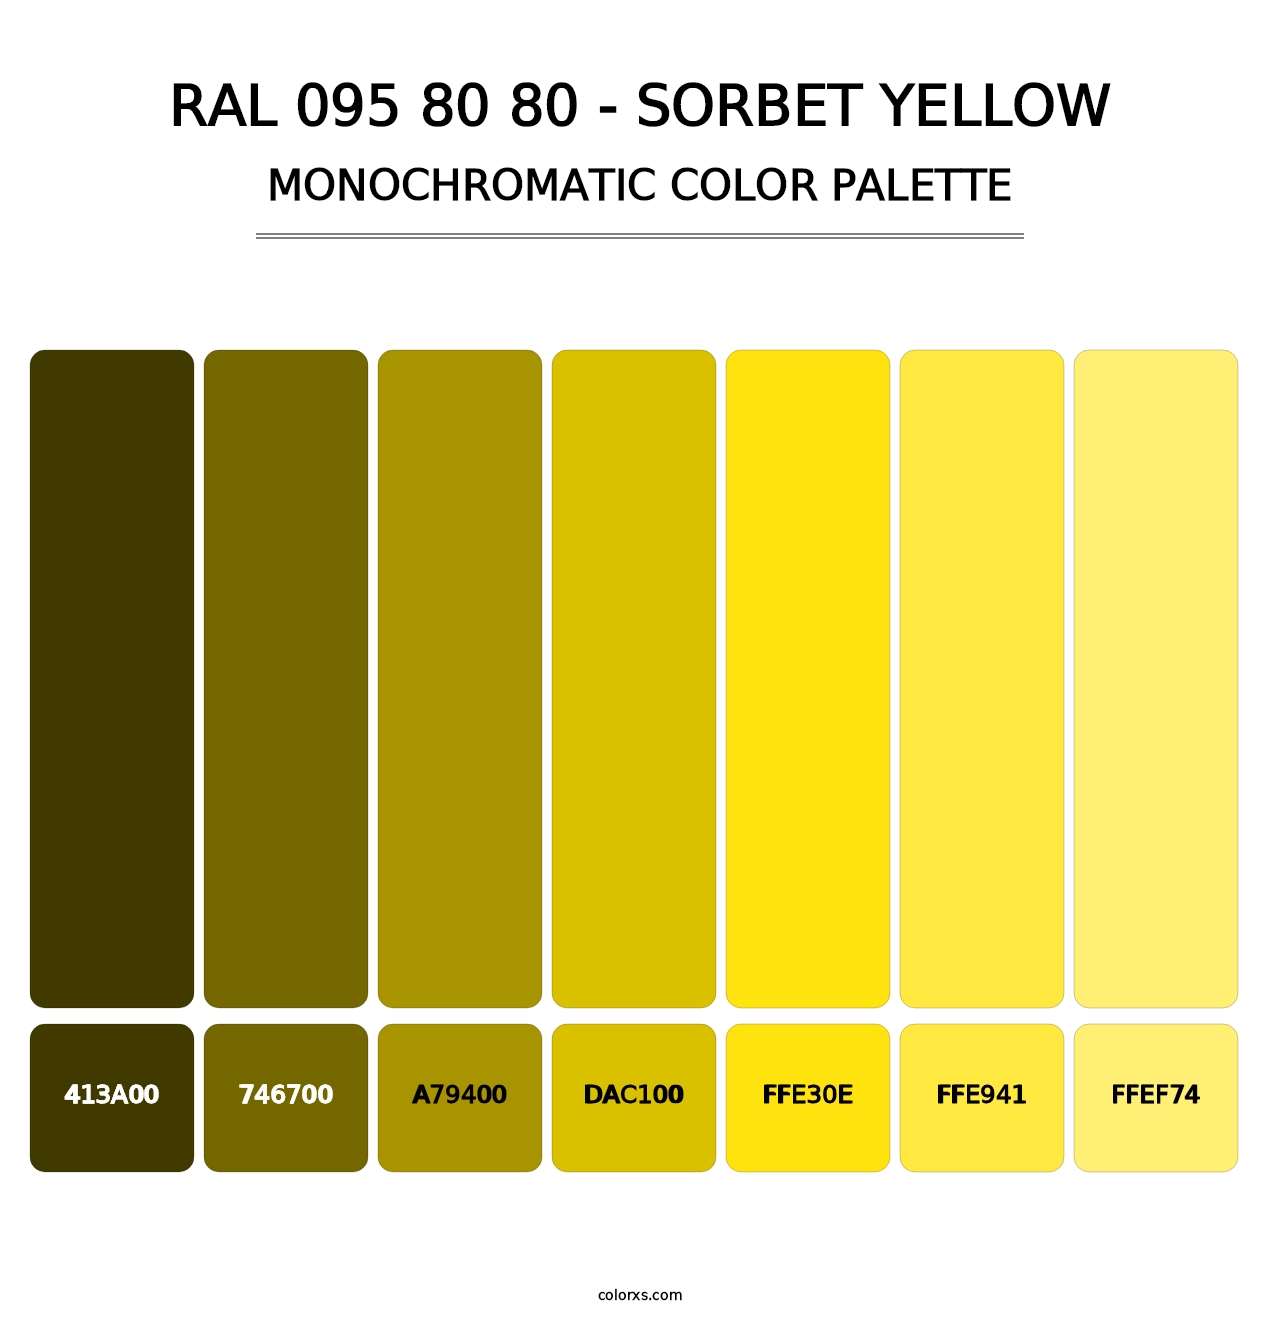 RAL 095 80 80 - Sorbet Yellow - Monochromatic Color Palette